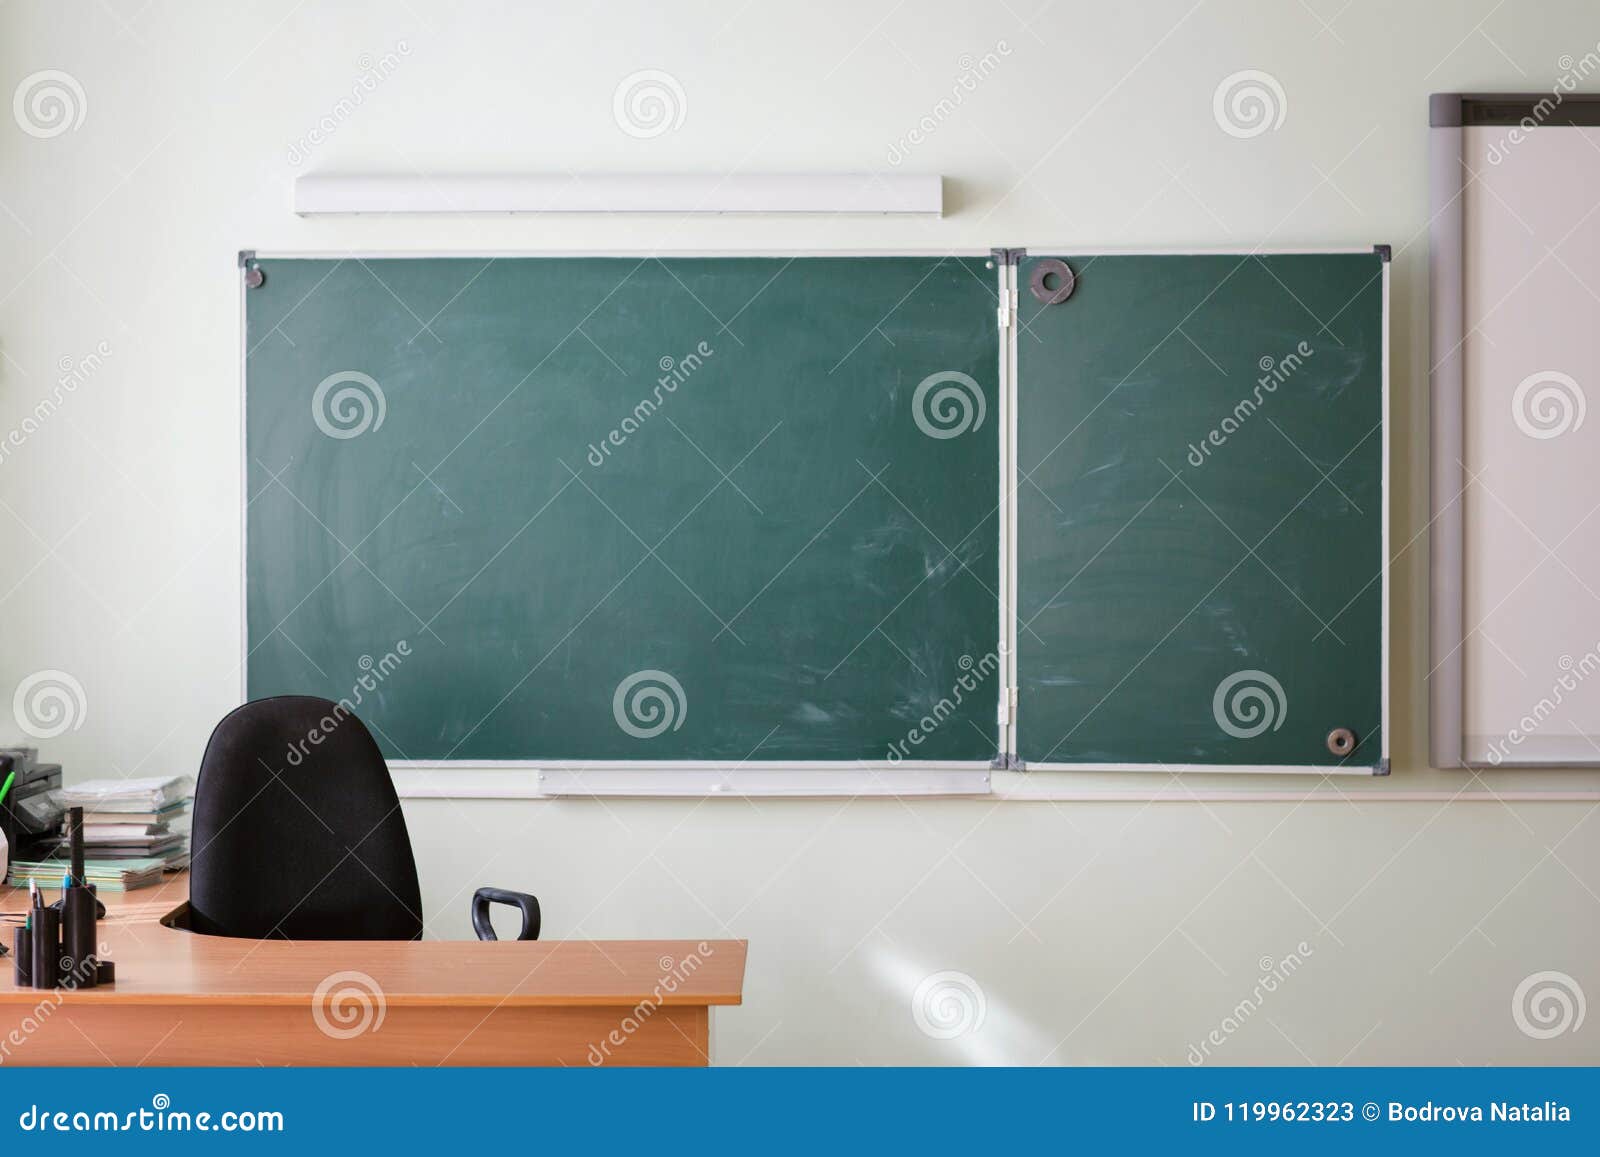 Classroom Background Stock Photos and Images - 123RF